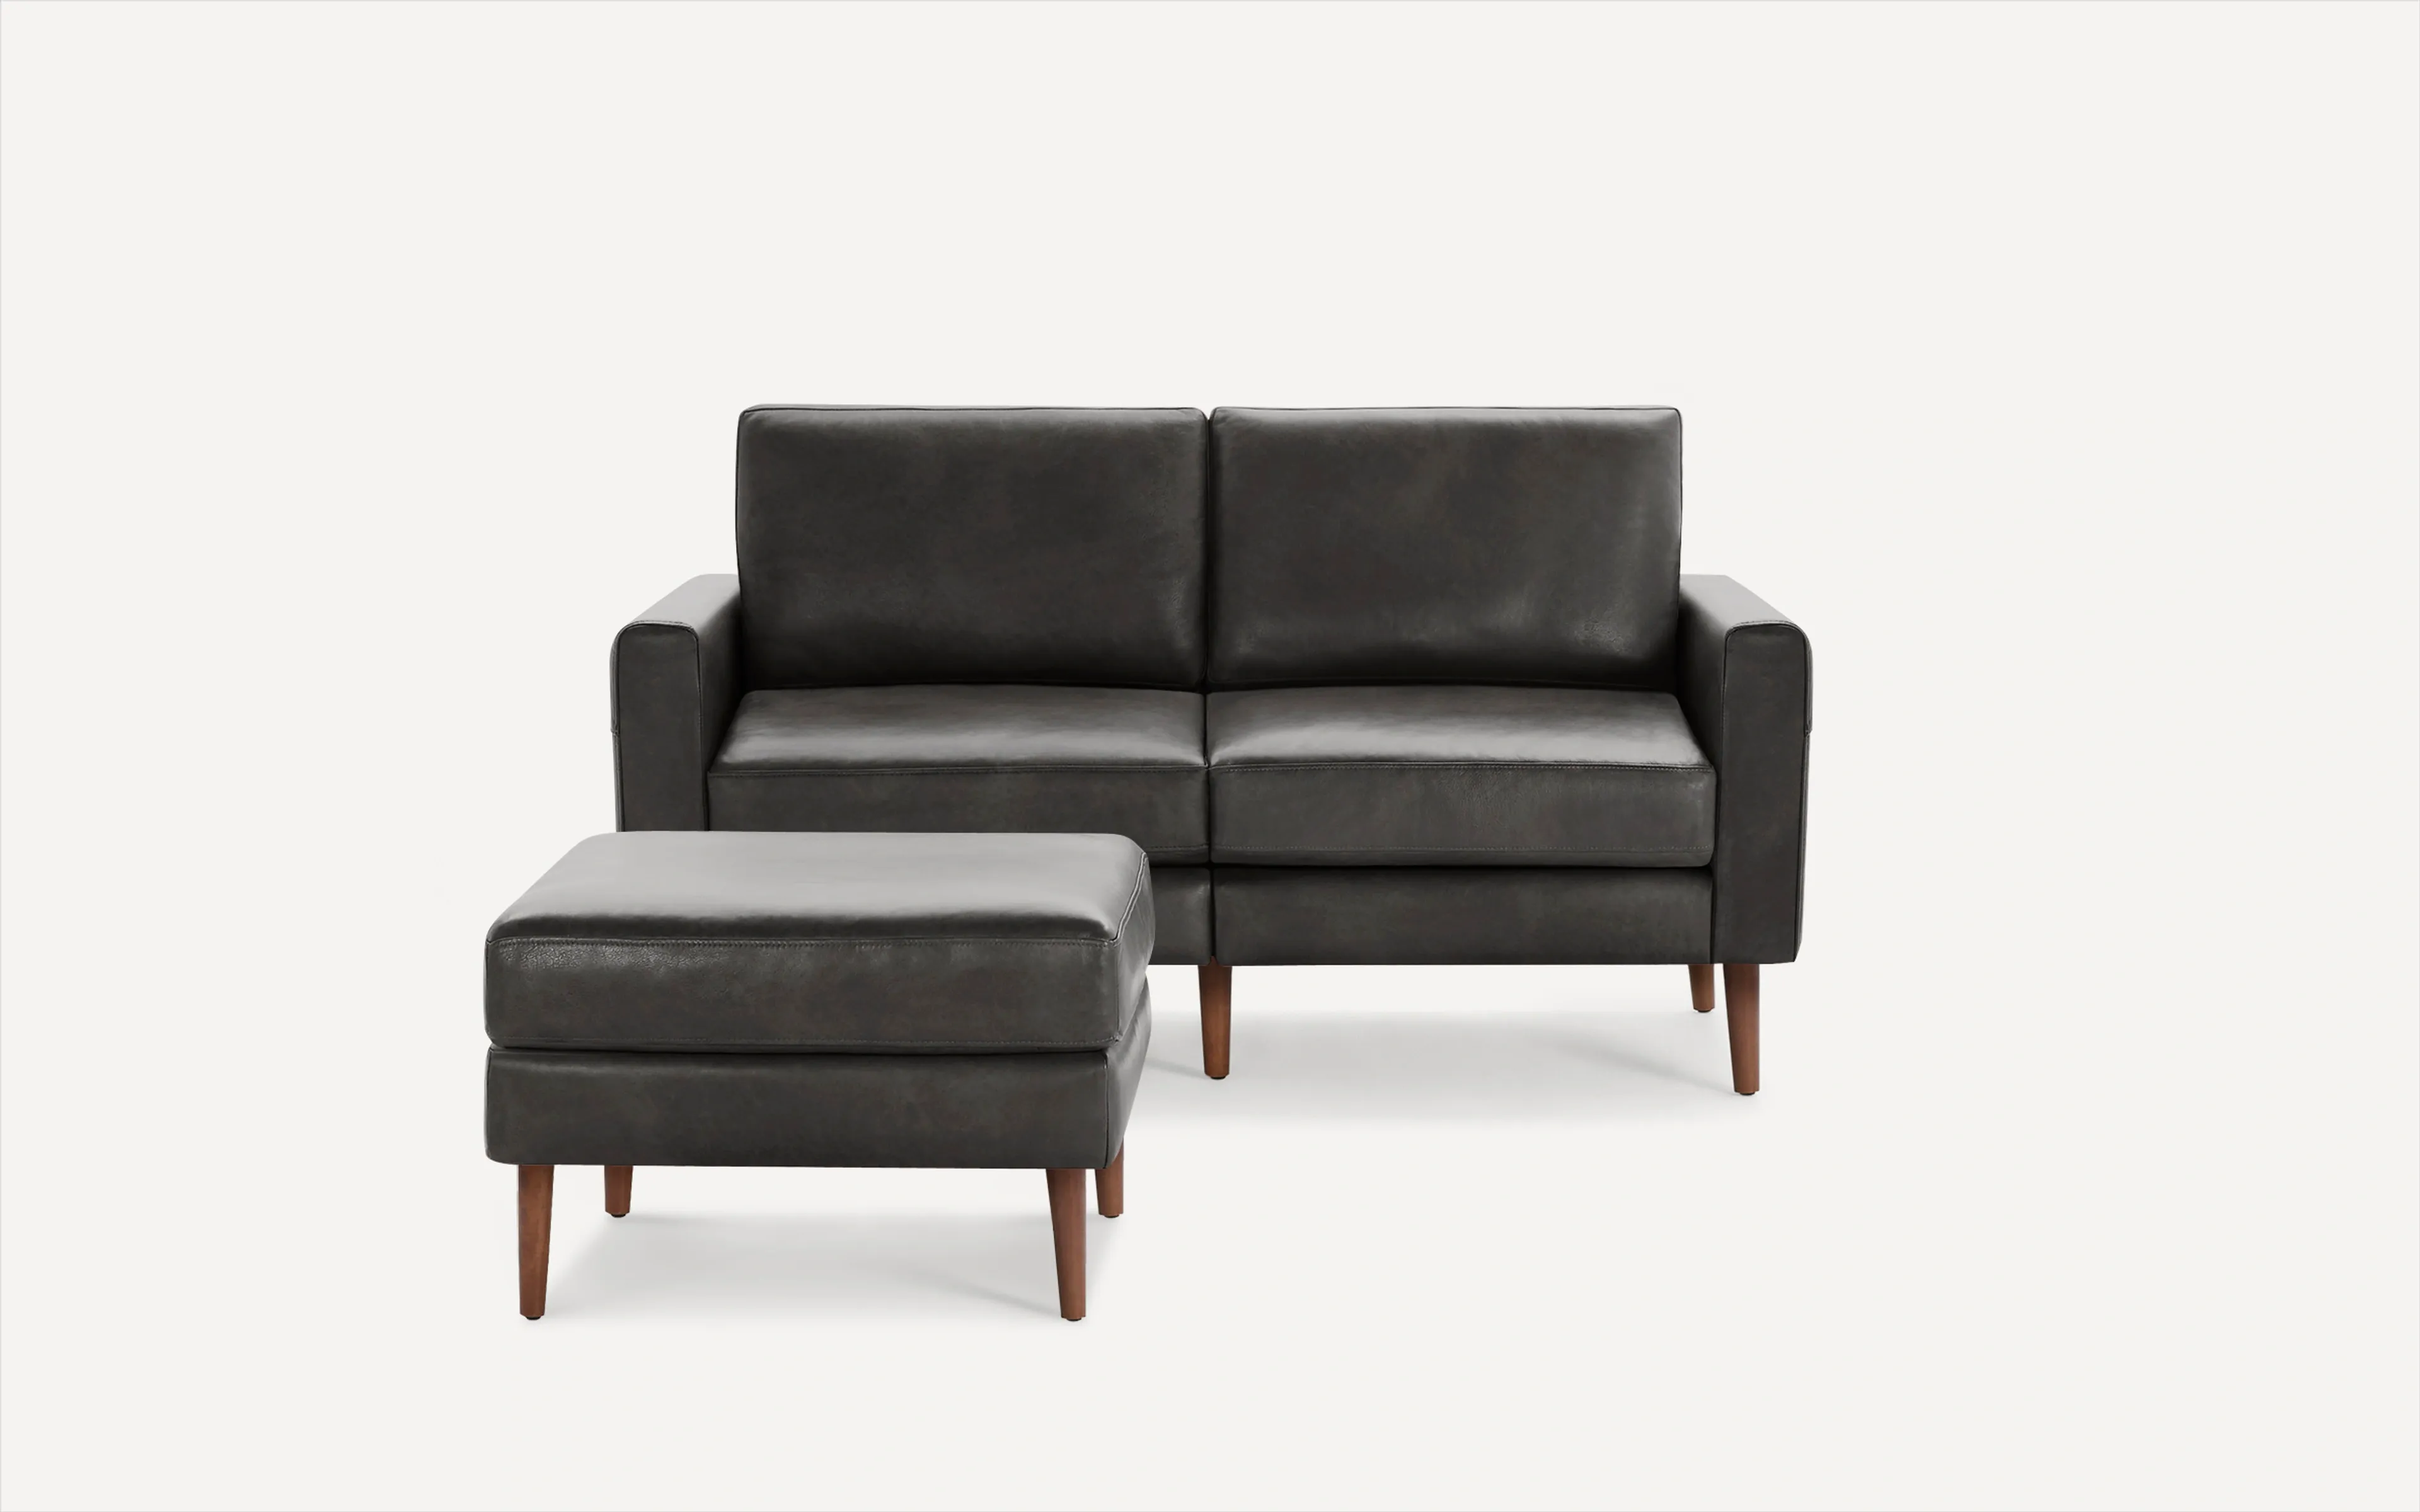 Original Nomad Loveseat with Ottoman in Slate Leather